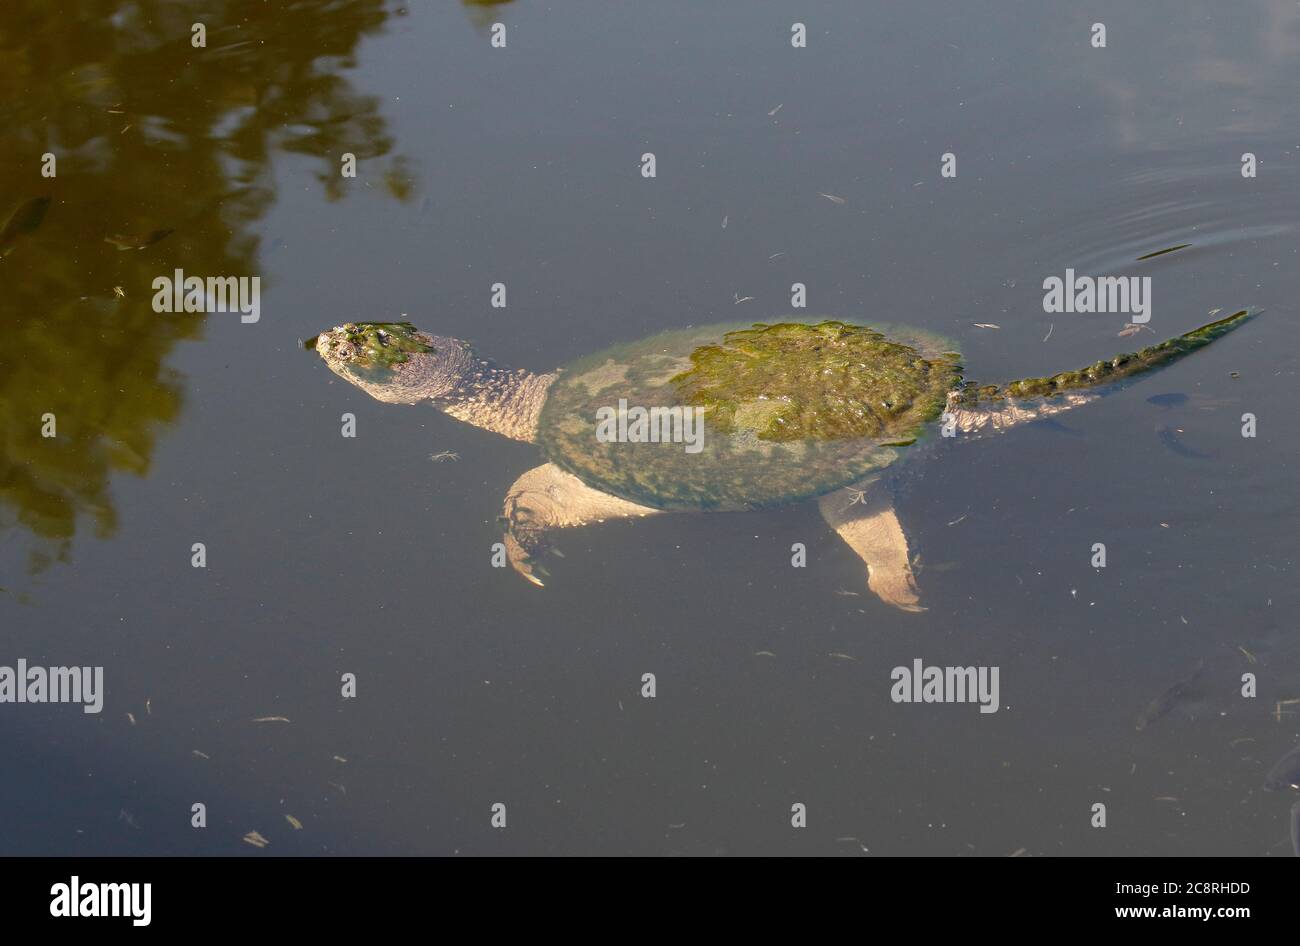 Snapping turtle underwater in Ithaca, New York lake Stock Photo